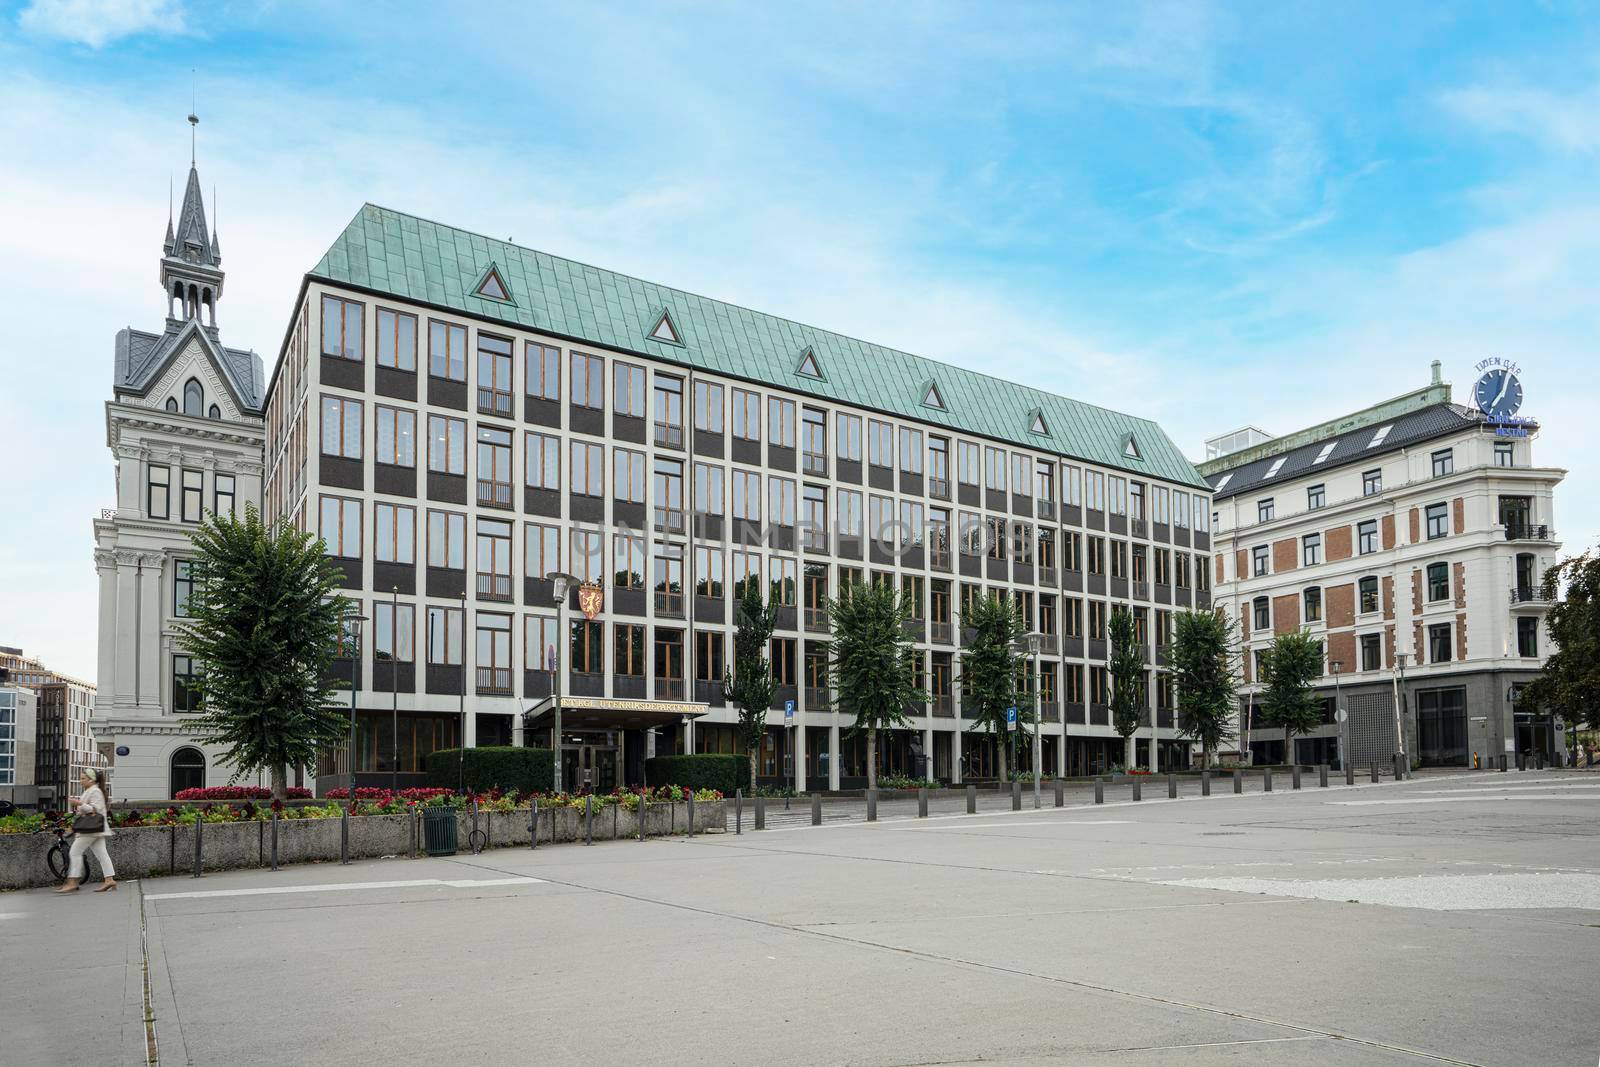 Oslo, Norway. September 2021. The outdoor view of the Foreign affairs ministry of Norway building in the city center